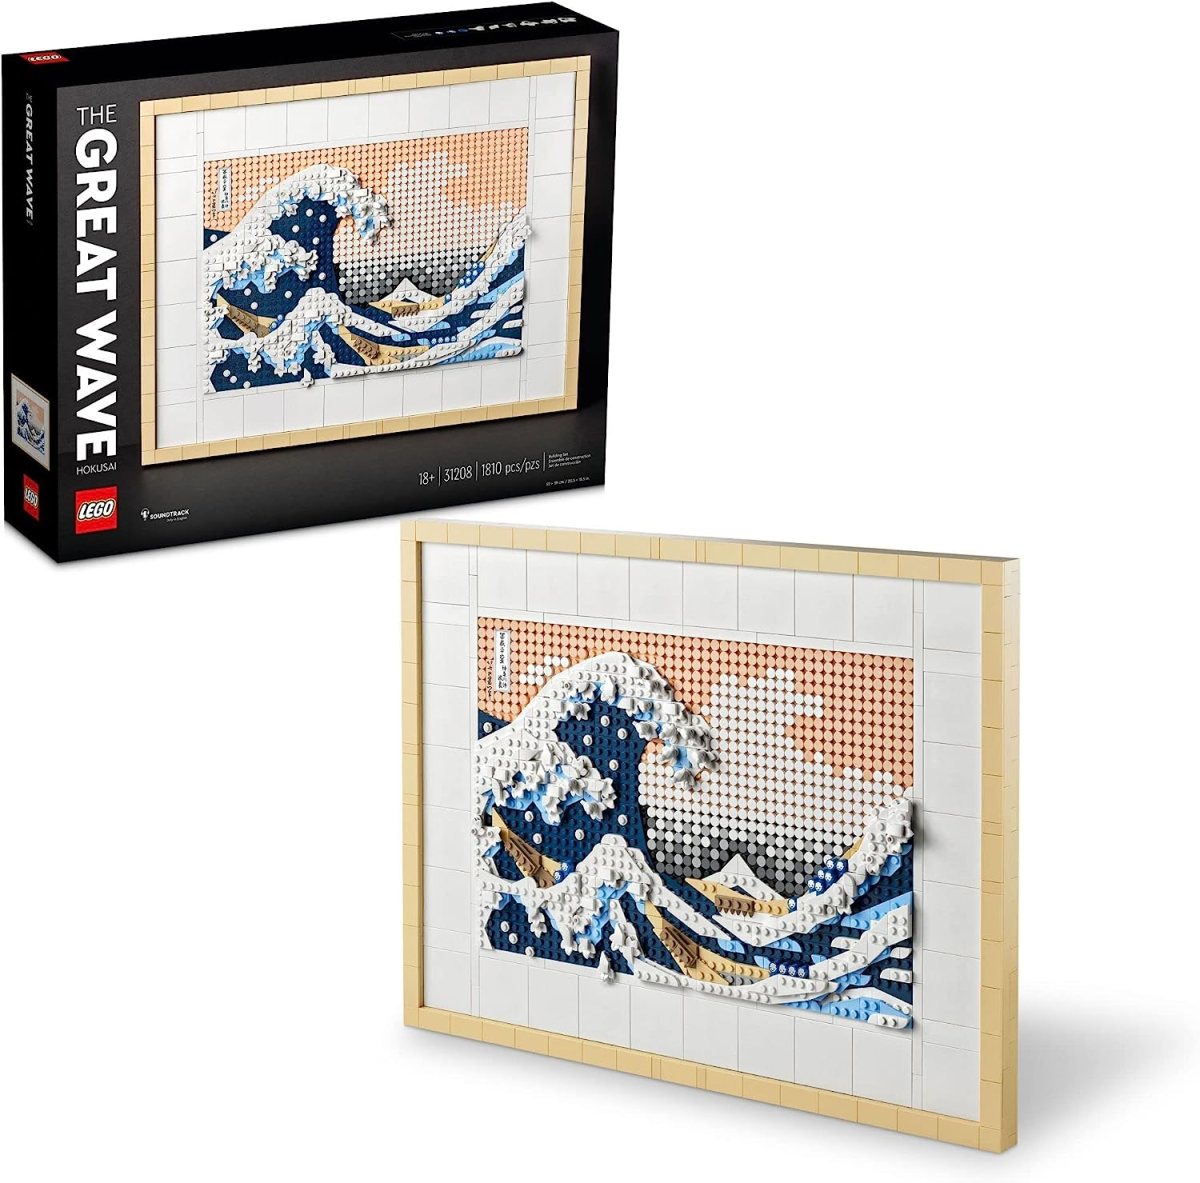 A painting made of LEGO, The Great Wave by Hokusai